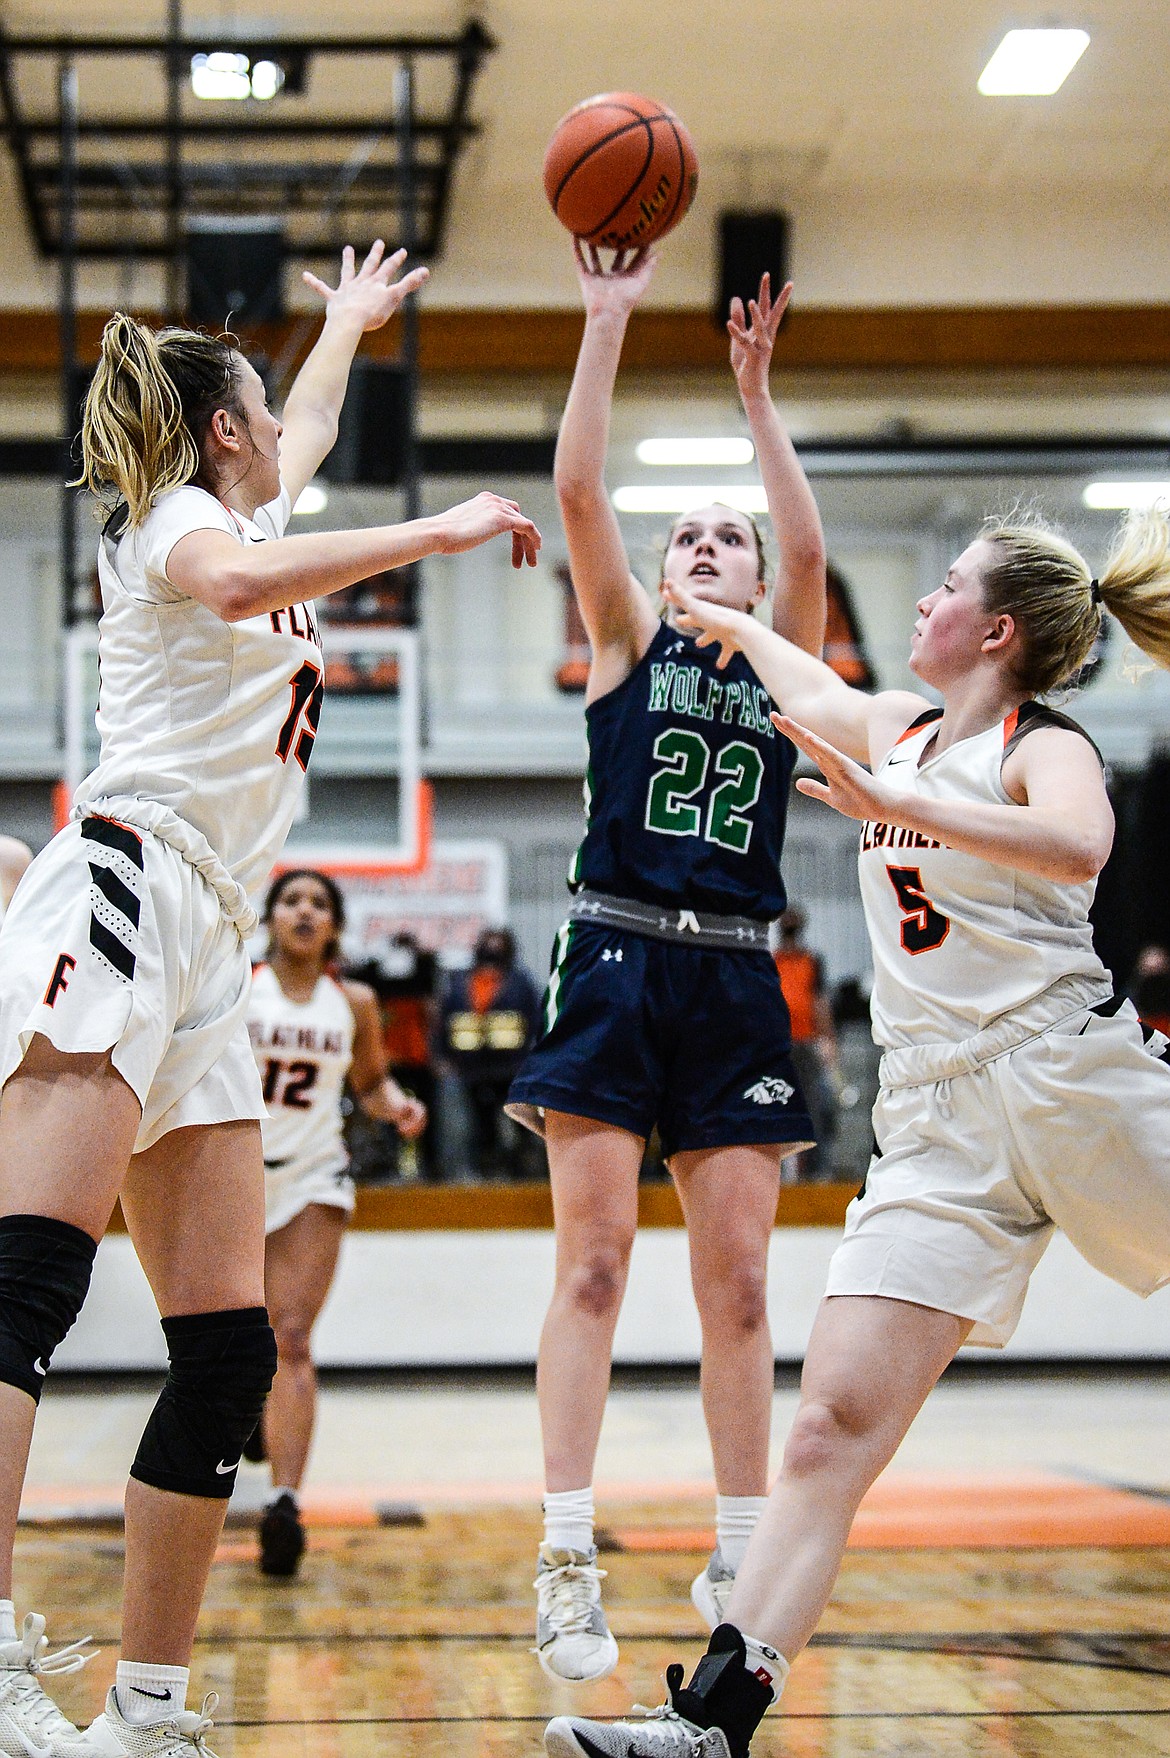 Glacier's Ellie Keller (22) shoots between Flathead's Clare Converse (15) and Molly Winters (34) at Flathead High School on Thursday. (Casey Kreider/Daily Inter Lake)